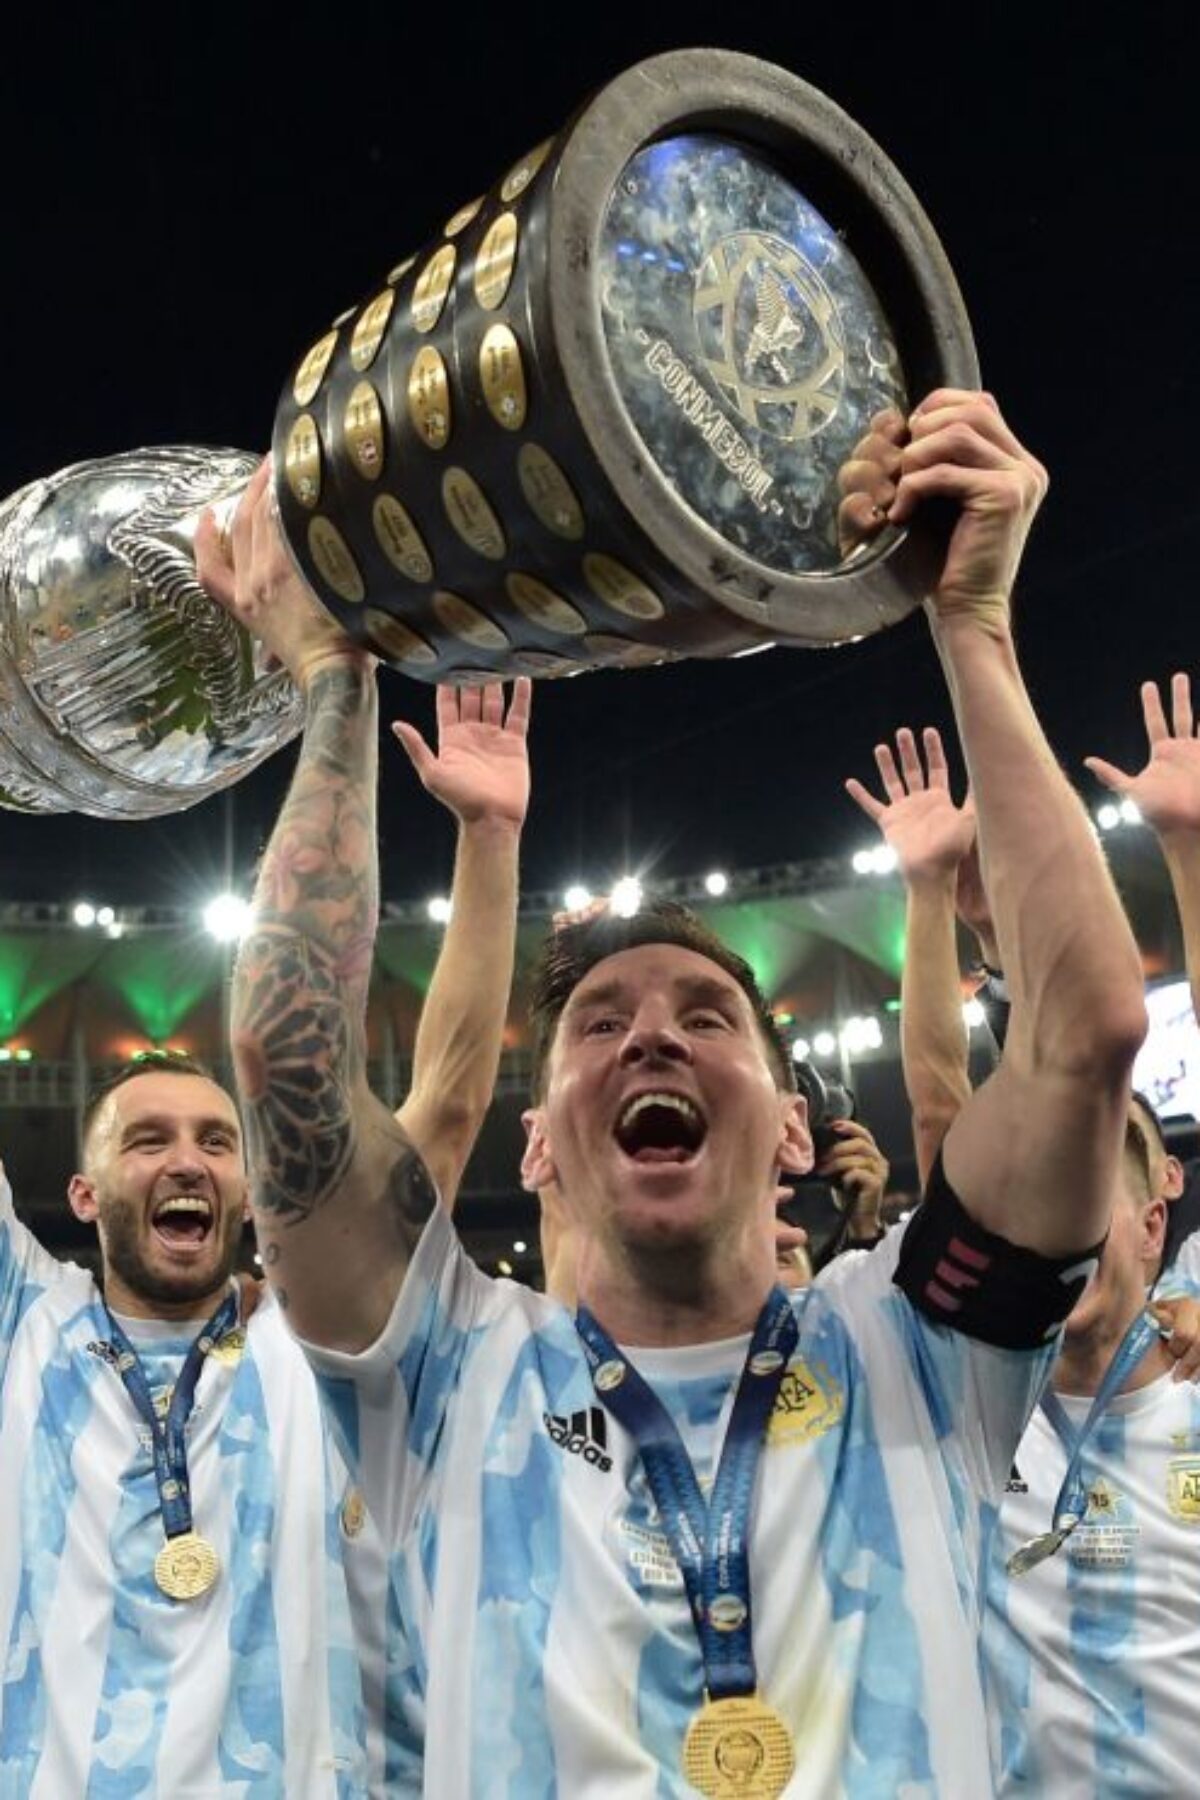 TOPSHOT - Argentina's Lionel Messi holds the trophy as he celebrates with teammates after winning the Conmebol 2021 Copa America football tournament final match against Brazil at Maracana Stadium in Rio de Janeiro, Brazil, on July 10, 2021. - Argentina won 1-0. (Photo by CARL DE SOUZA / AFP) (Photo by CARL DE SOUZA/AFP via Getty Images)